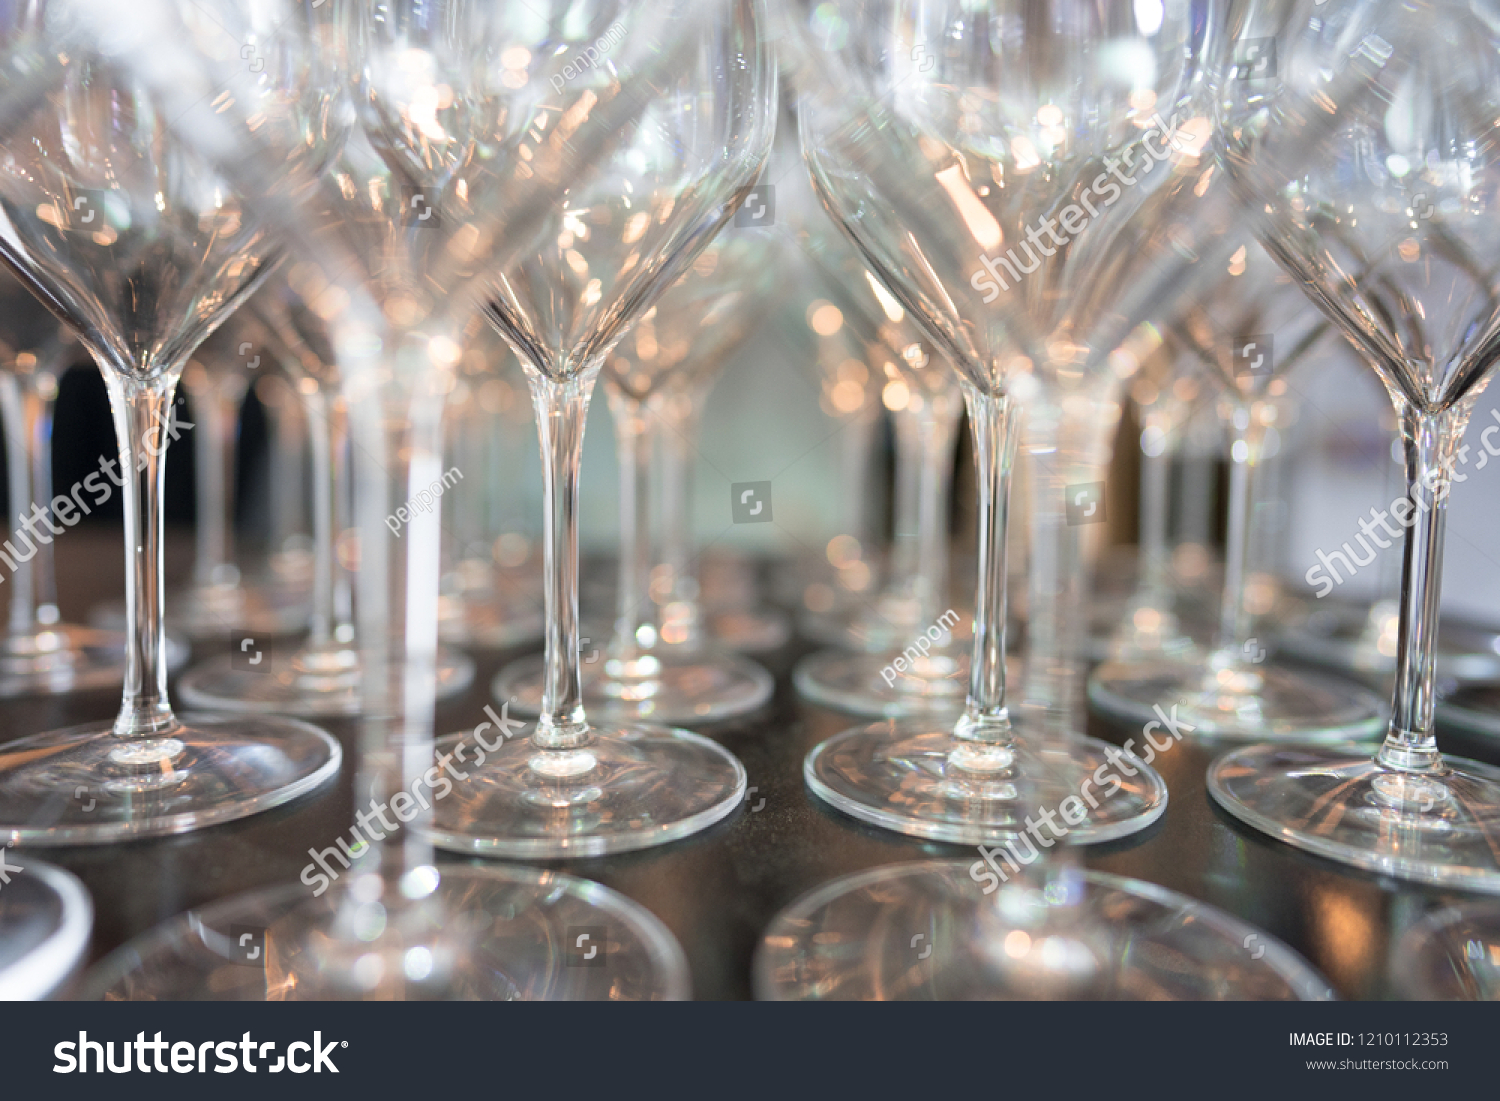 repetition of wine glass reflection and glamour. endless night of a classy party #1210112353